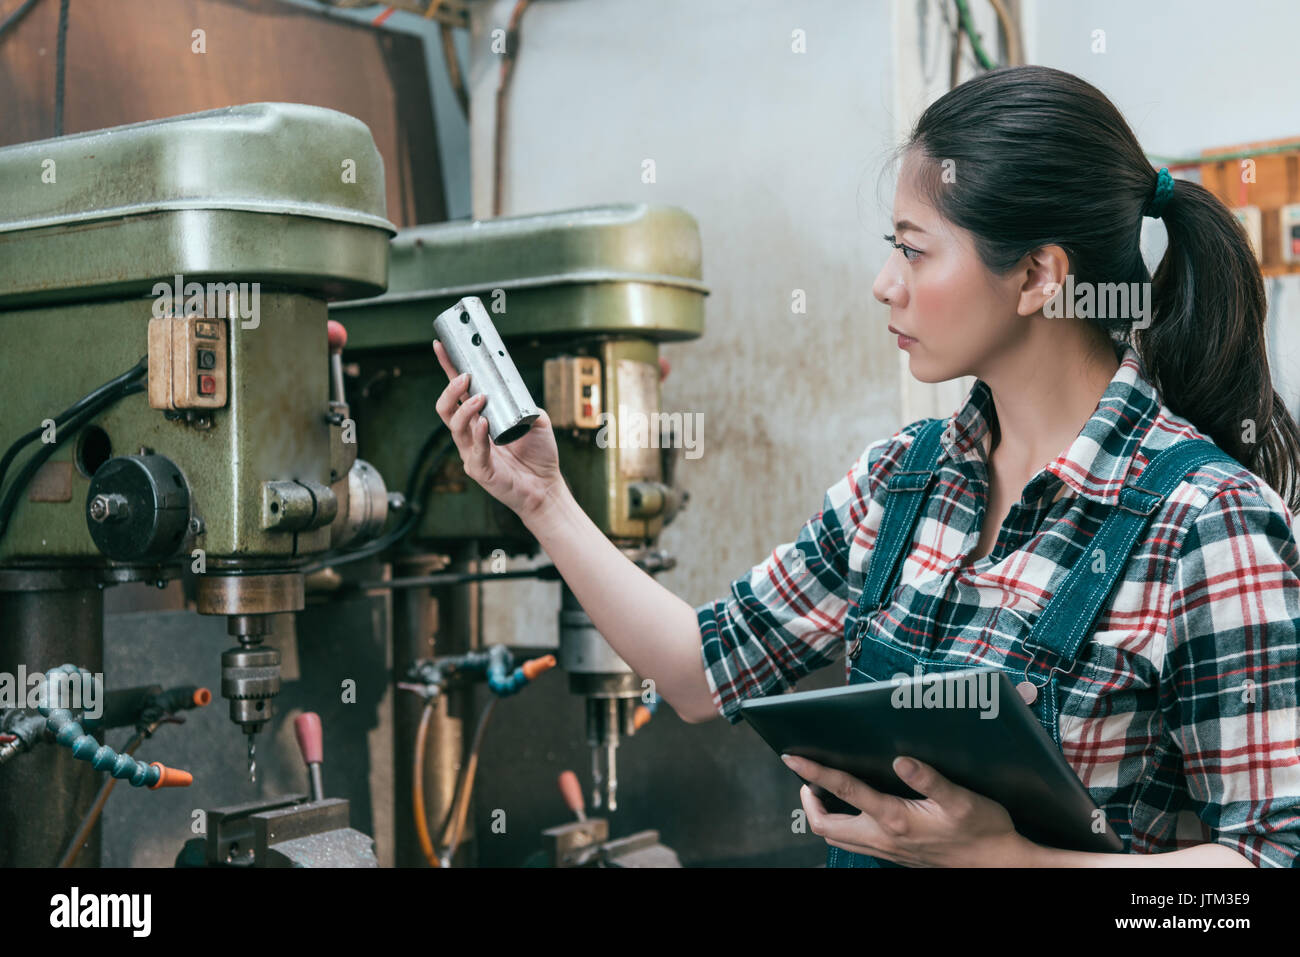 beautiful milling machining employee girl holding mobile digital tablet standing in front of drilling machine and holding components doing inspection. Stock Photo